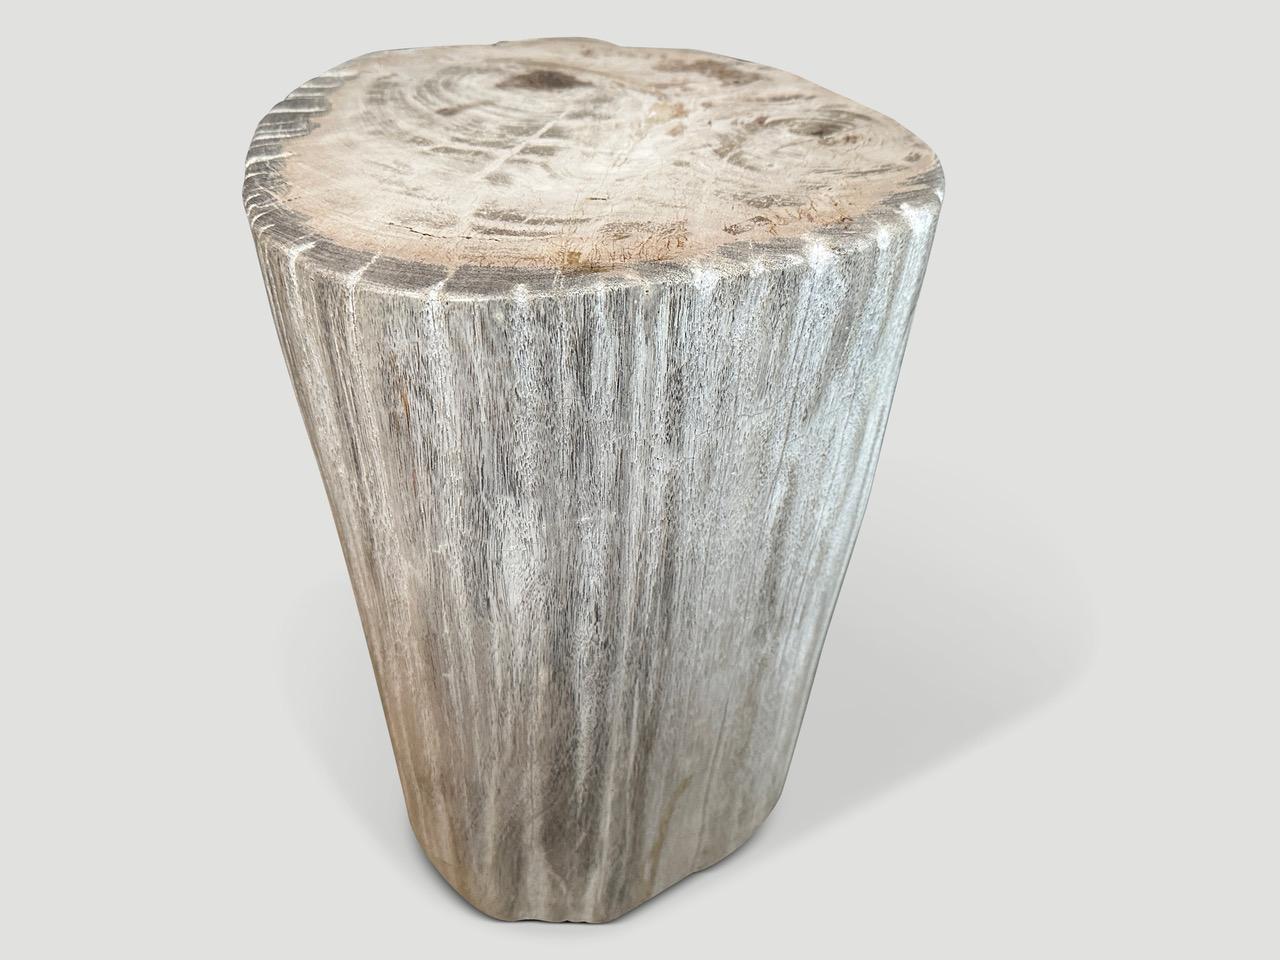 Beautiful pale grey tones on this impressive high quality petrified wood side table. It’s fascinating how Mother Nature produces these stunning 40 million year old petrified teak logs with such contrasting colors and natural patterns throughout.